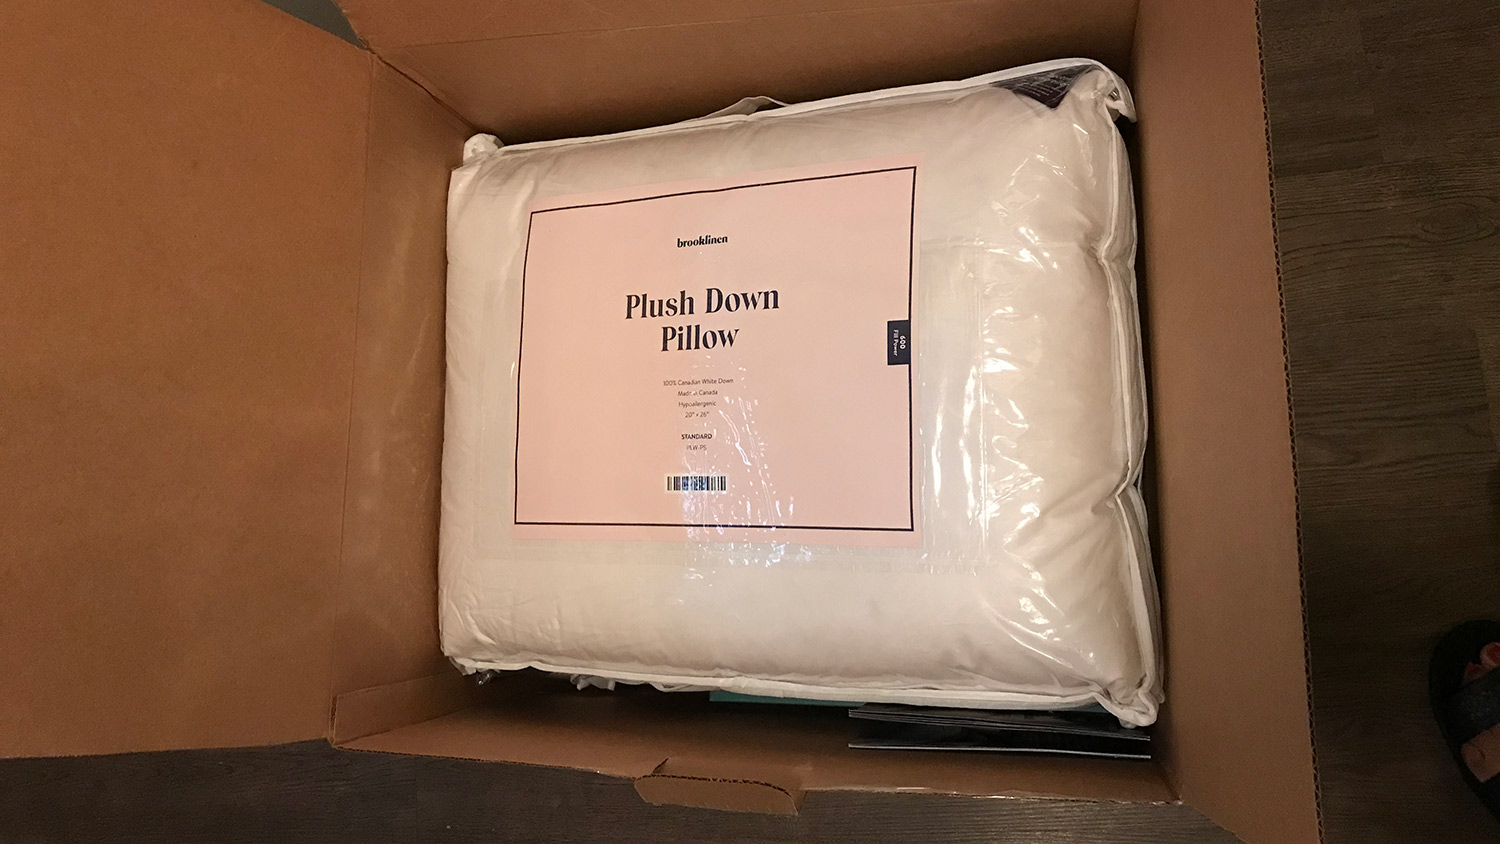 Brooklinen Plush Down Pillow in its delivery box